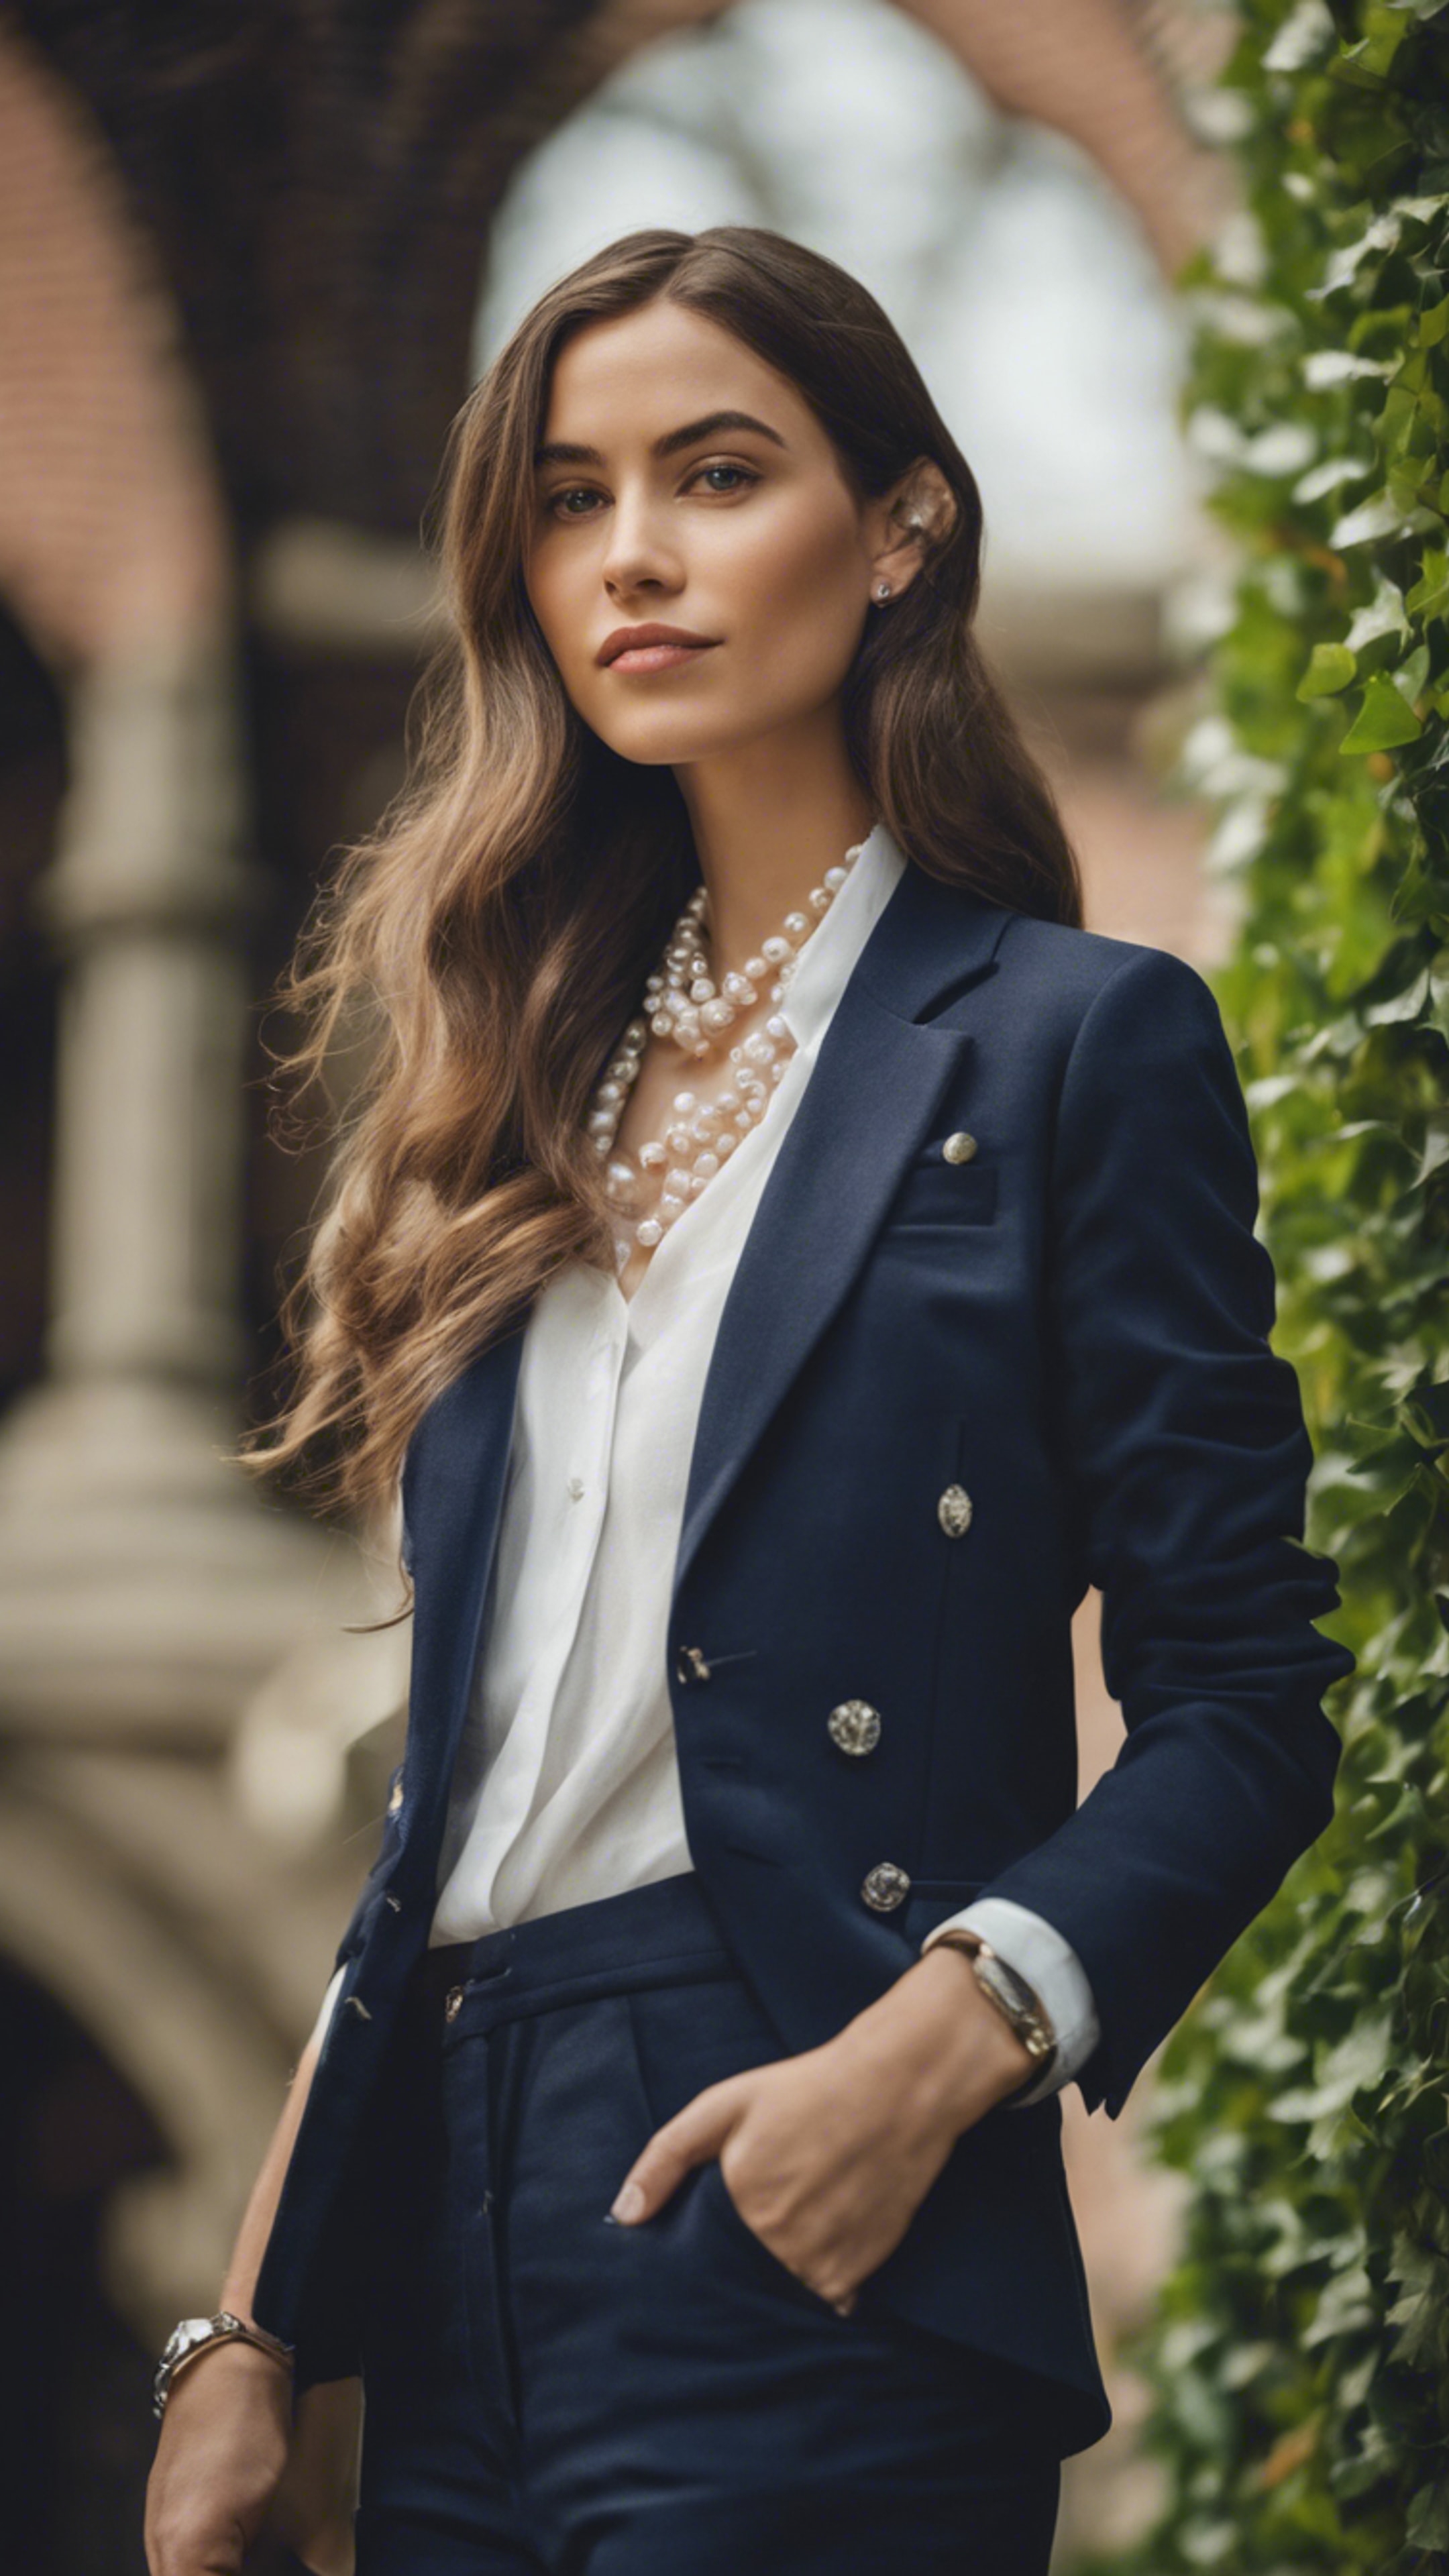 A portrait of a preppy woman in a navy blue blazer, pearl necklace, and a white linen shirt, posing in an Ivy League campus. Валлпапер[1775f808339c45cb81cf]